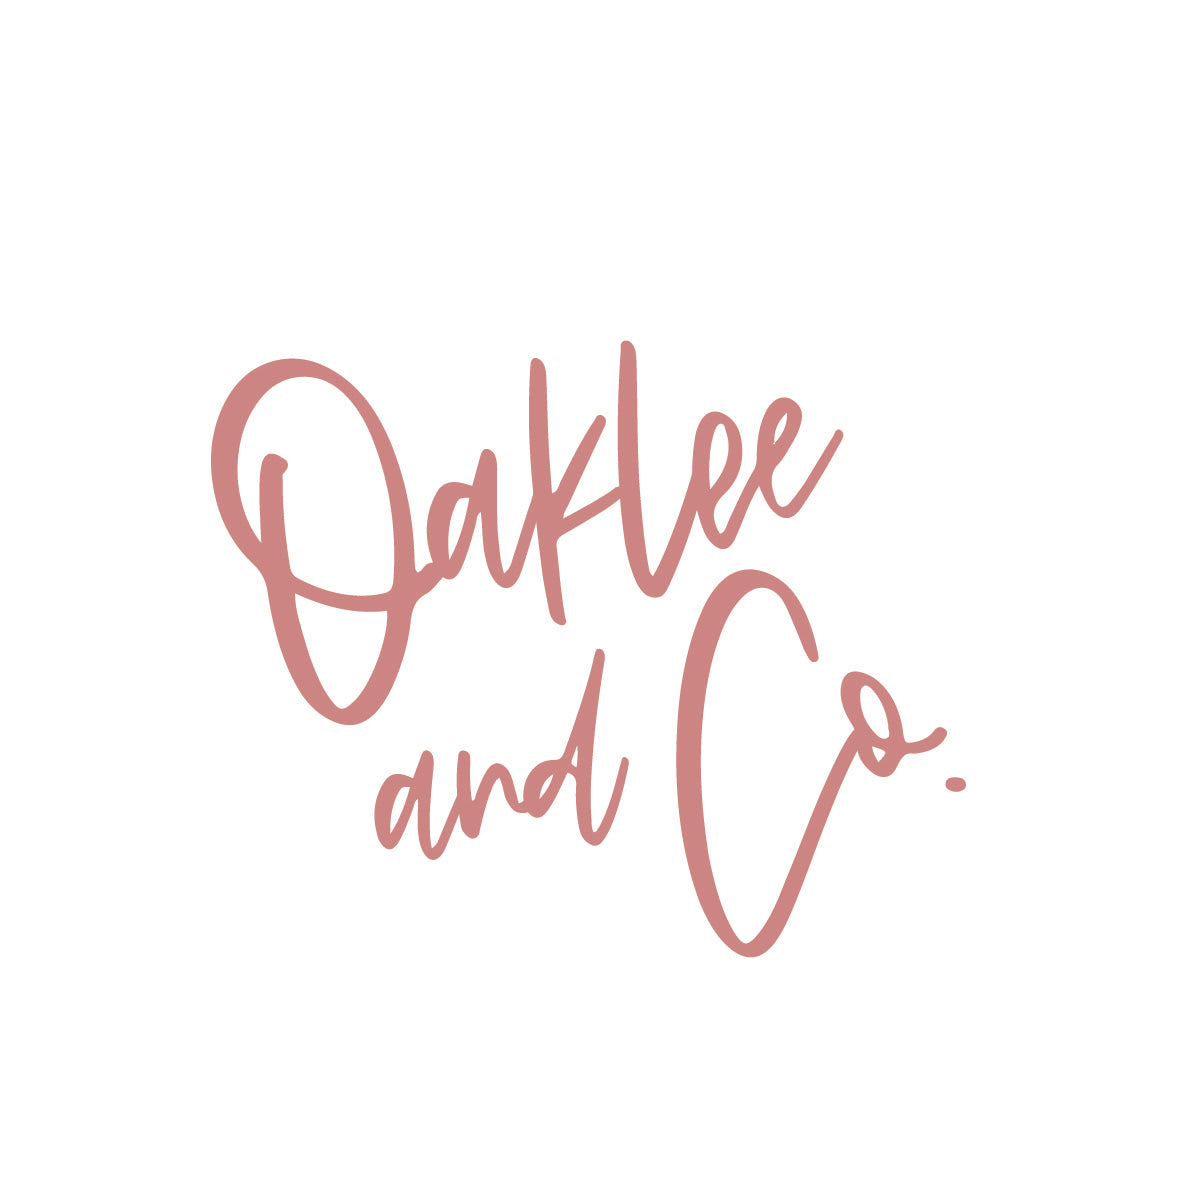 Oaklee and Co